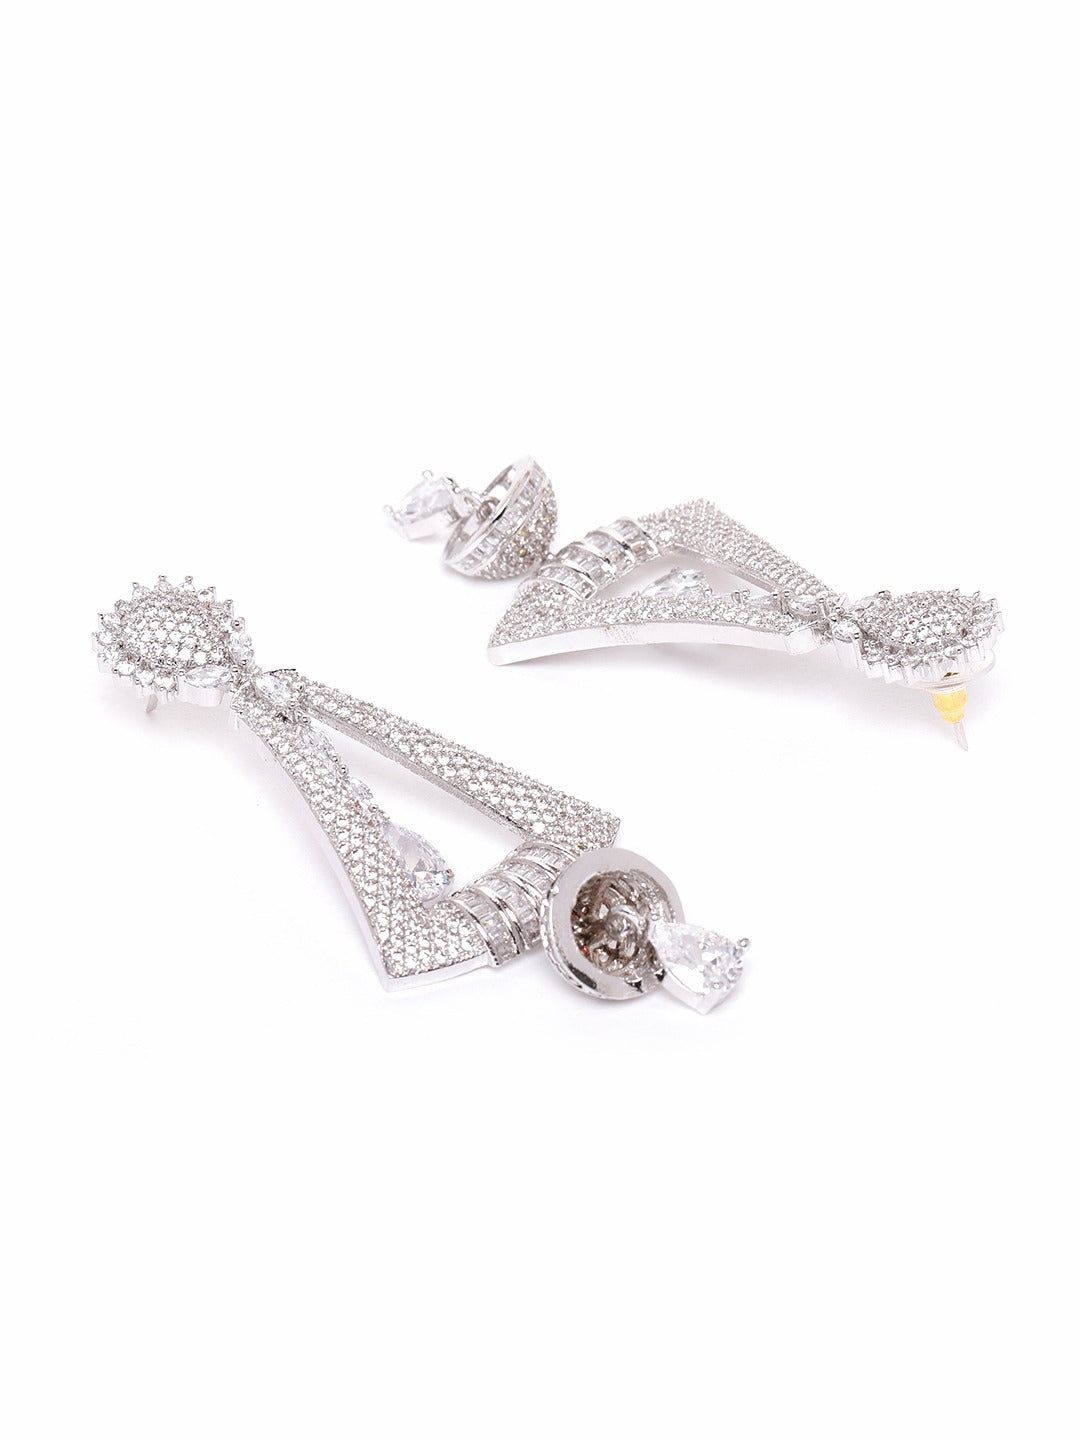 Silver-Plated Handcrafted AD-Studded Contemporary Drop Earrings